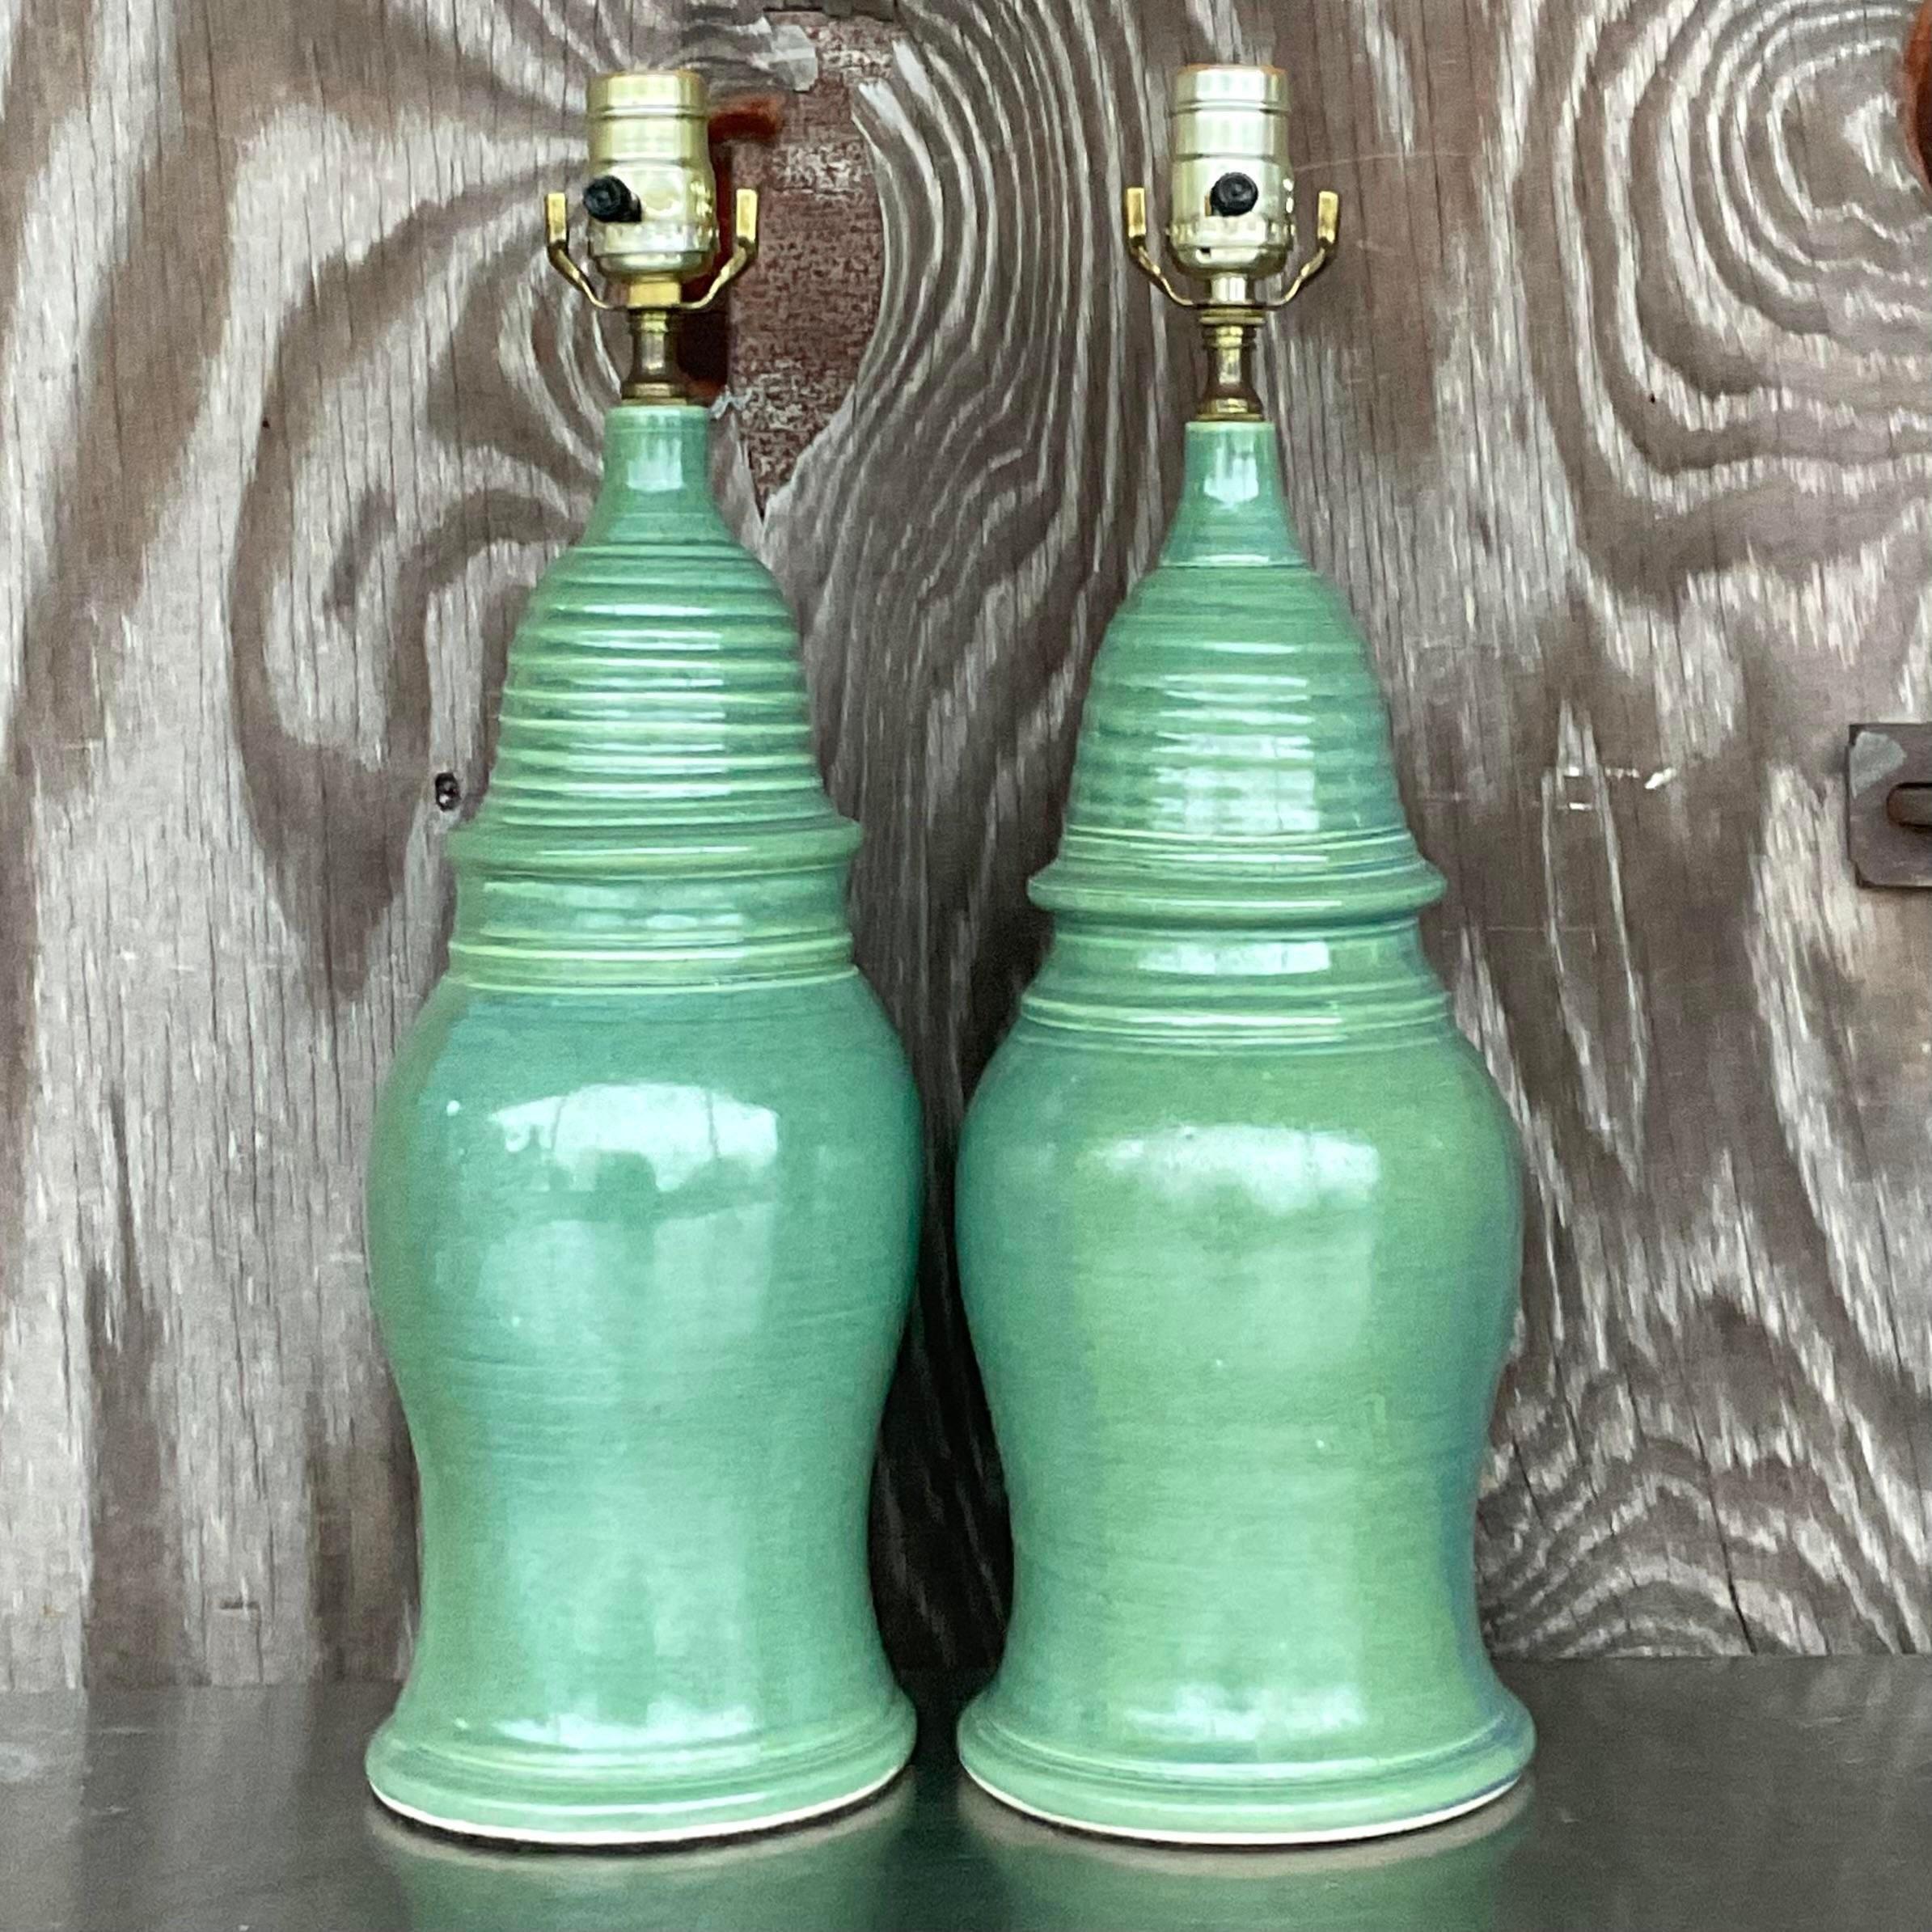 Metal Vintage Boho Glazed Ceramic Table Lamps - a Pair For Sale